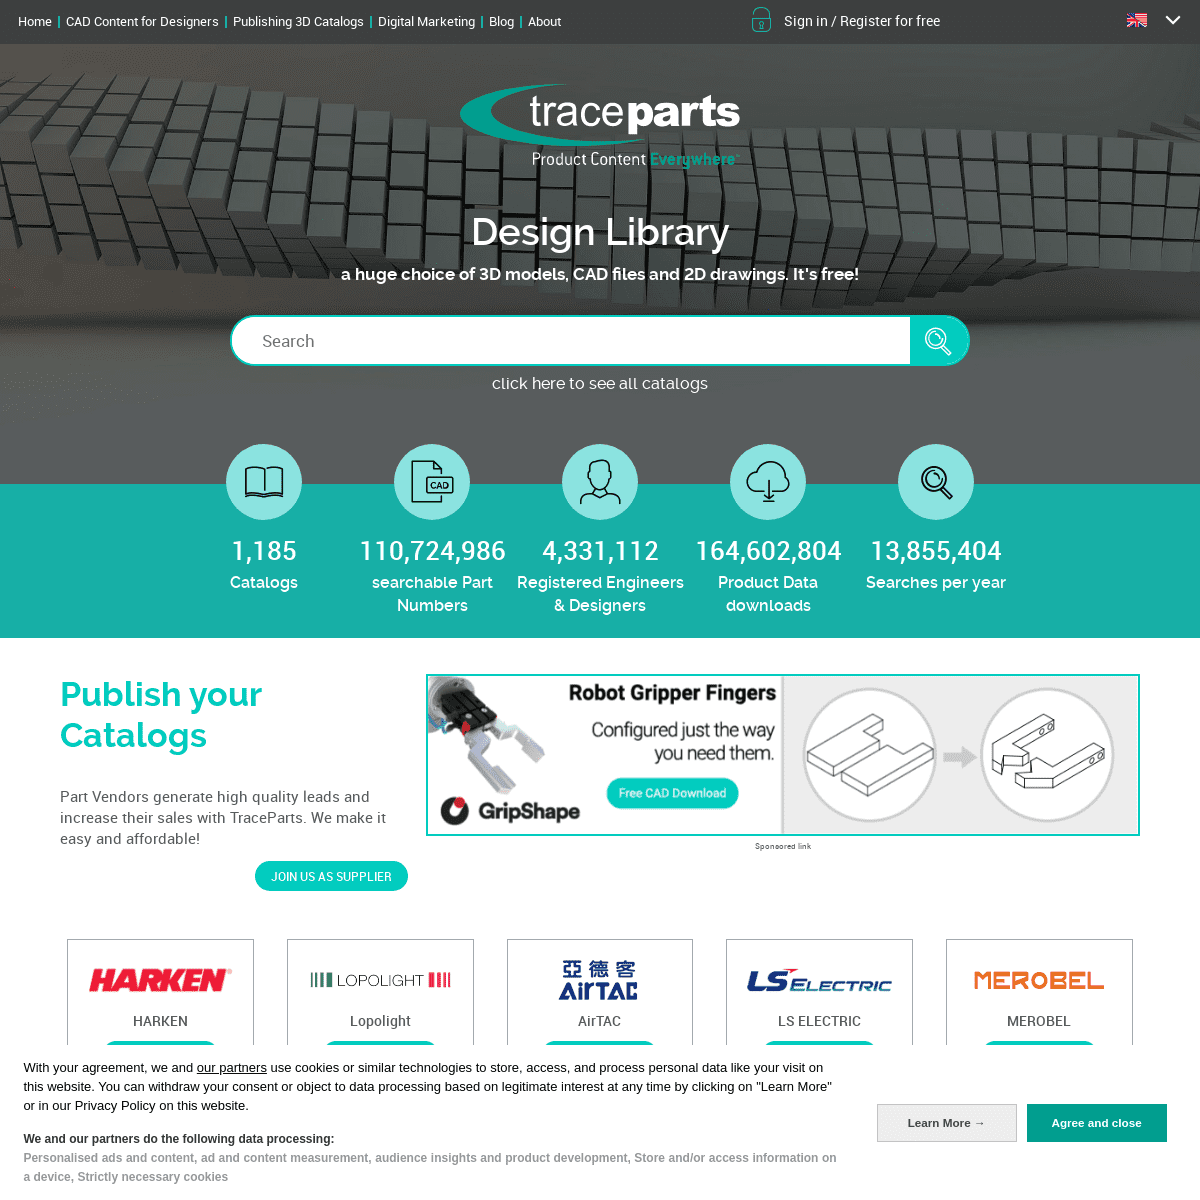 A complete backup of https://traceparts.com